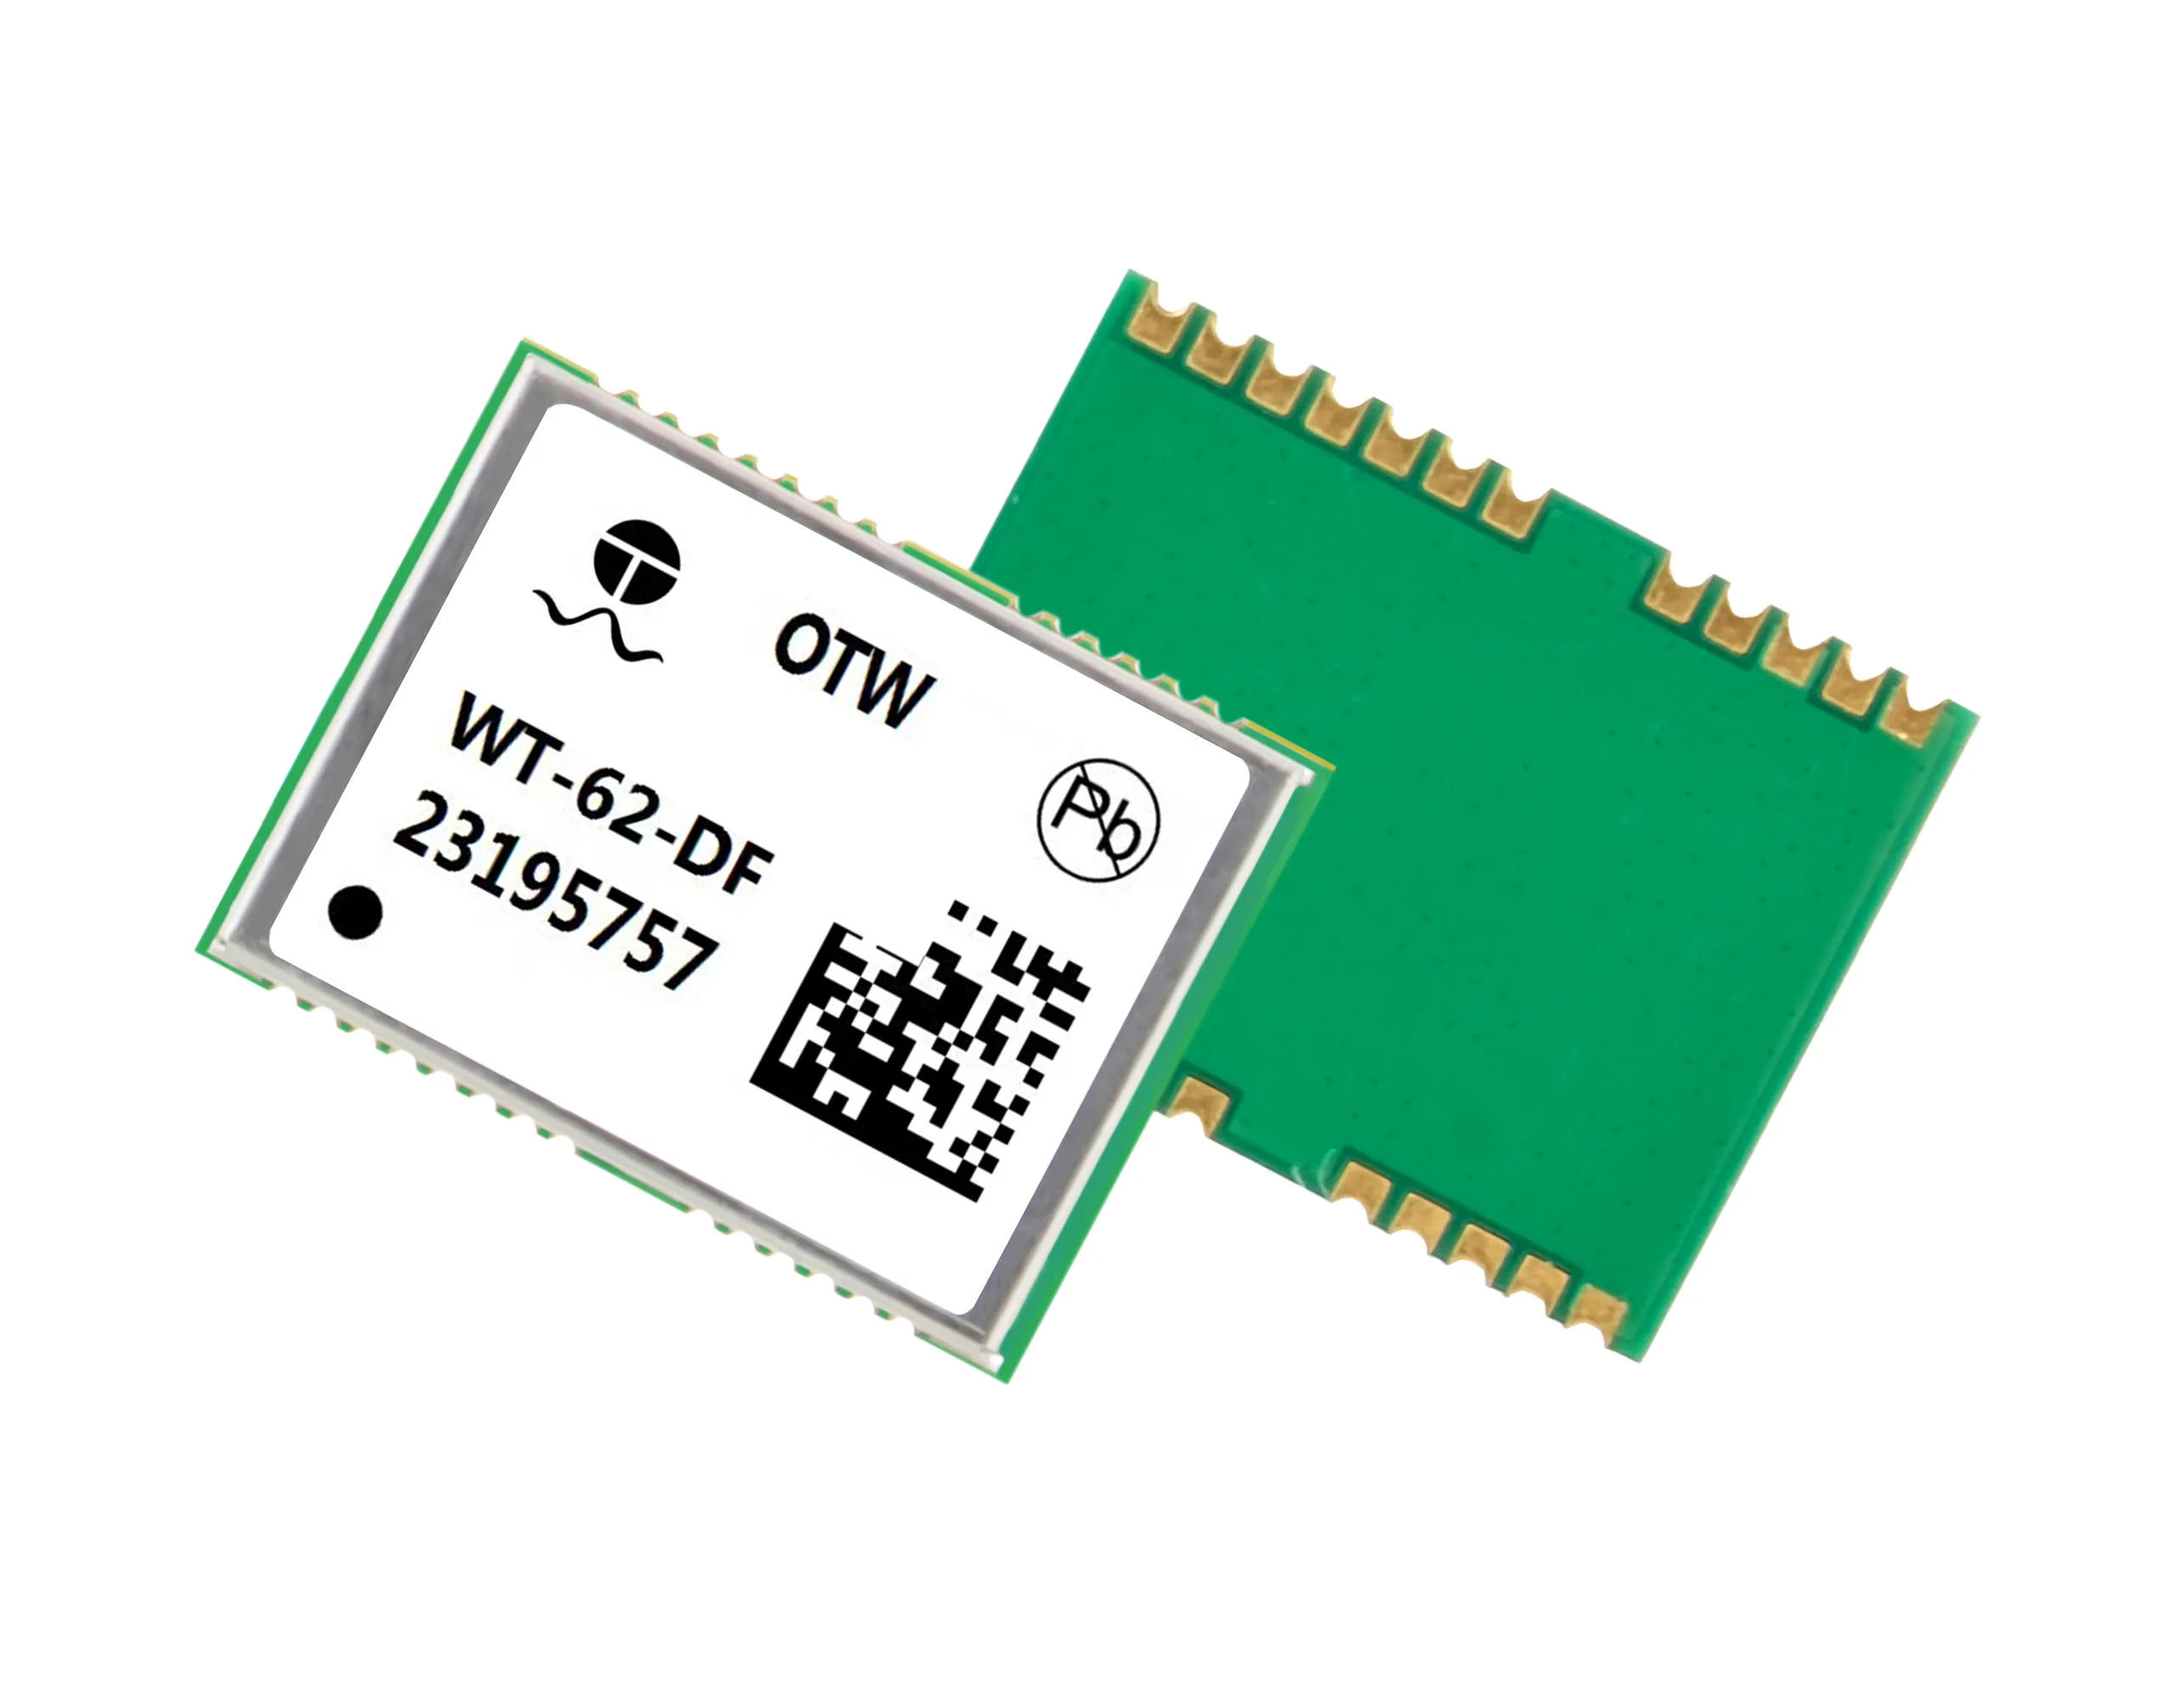 WT-62-DF Ultra-Low Power Consumption GPS Tracking Module Smallest GNSS Location Chip For Efficient Vehicle Tracking